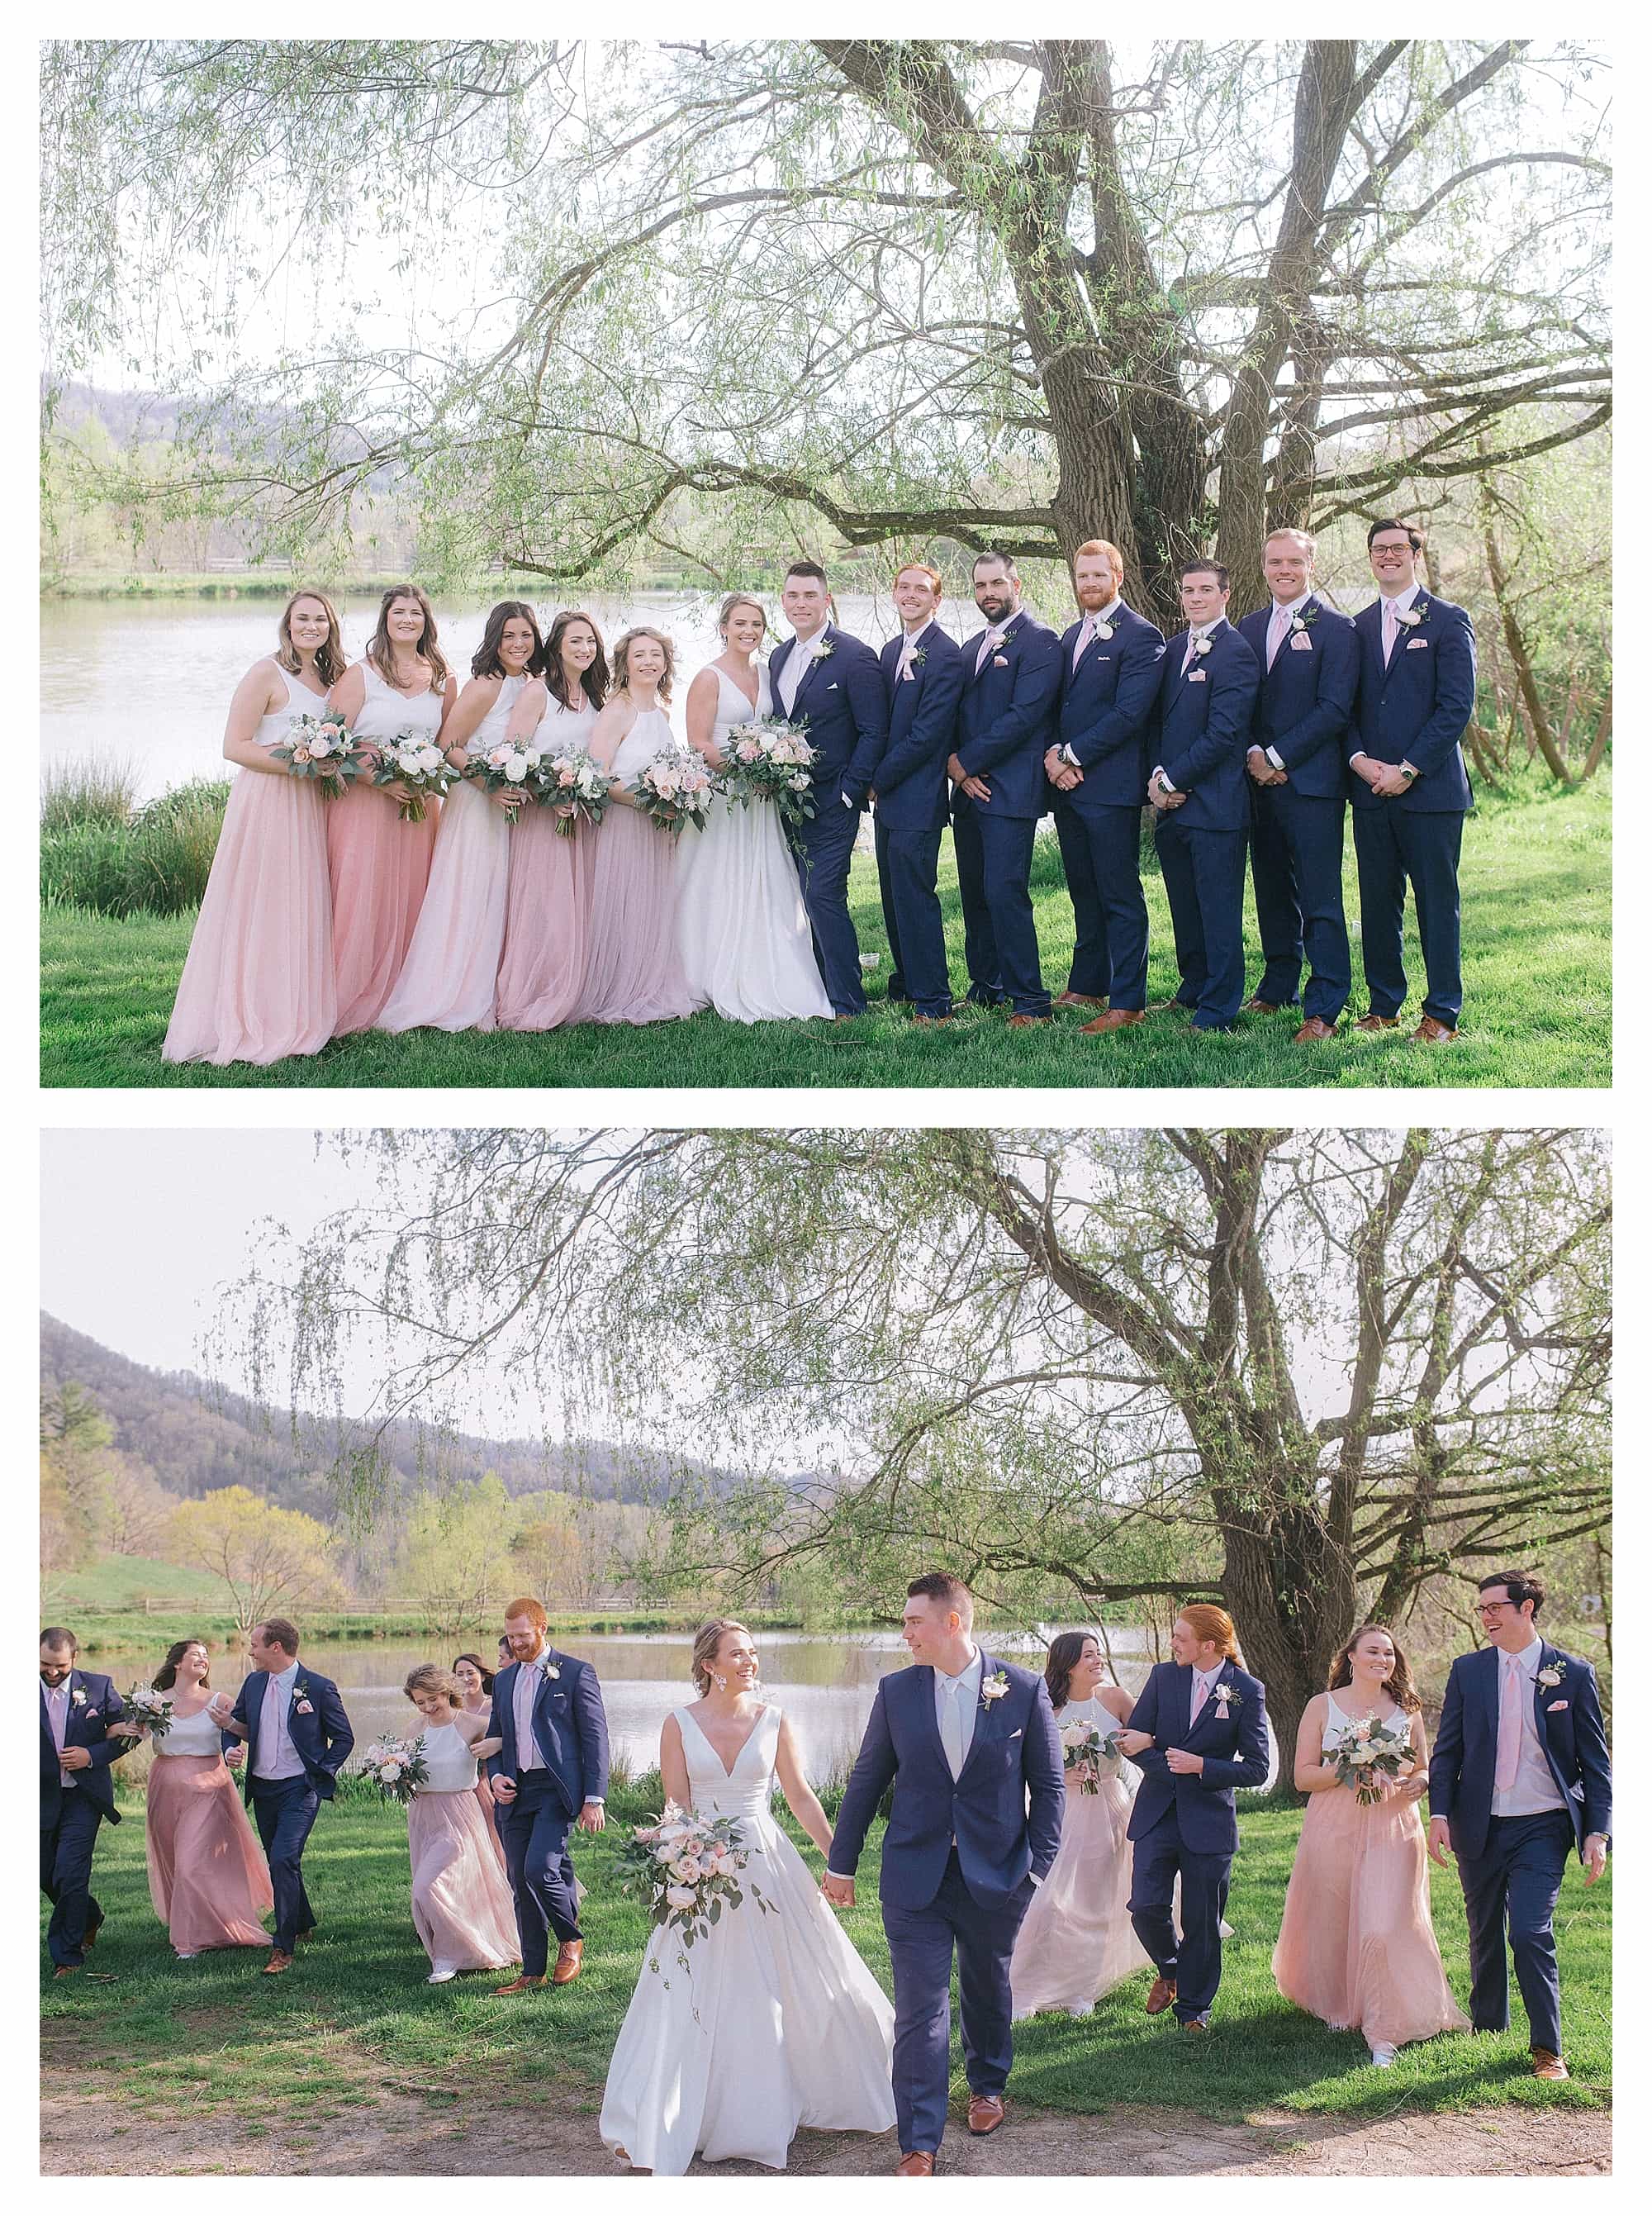 Wedding party posing beside pond under willow tree